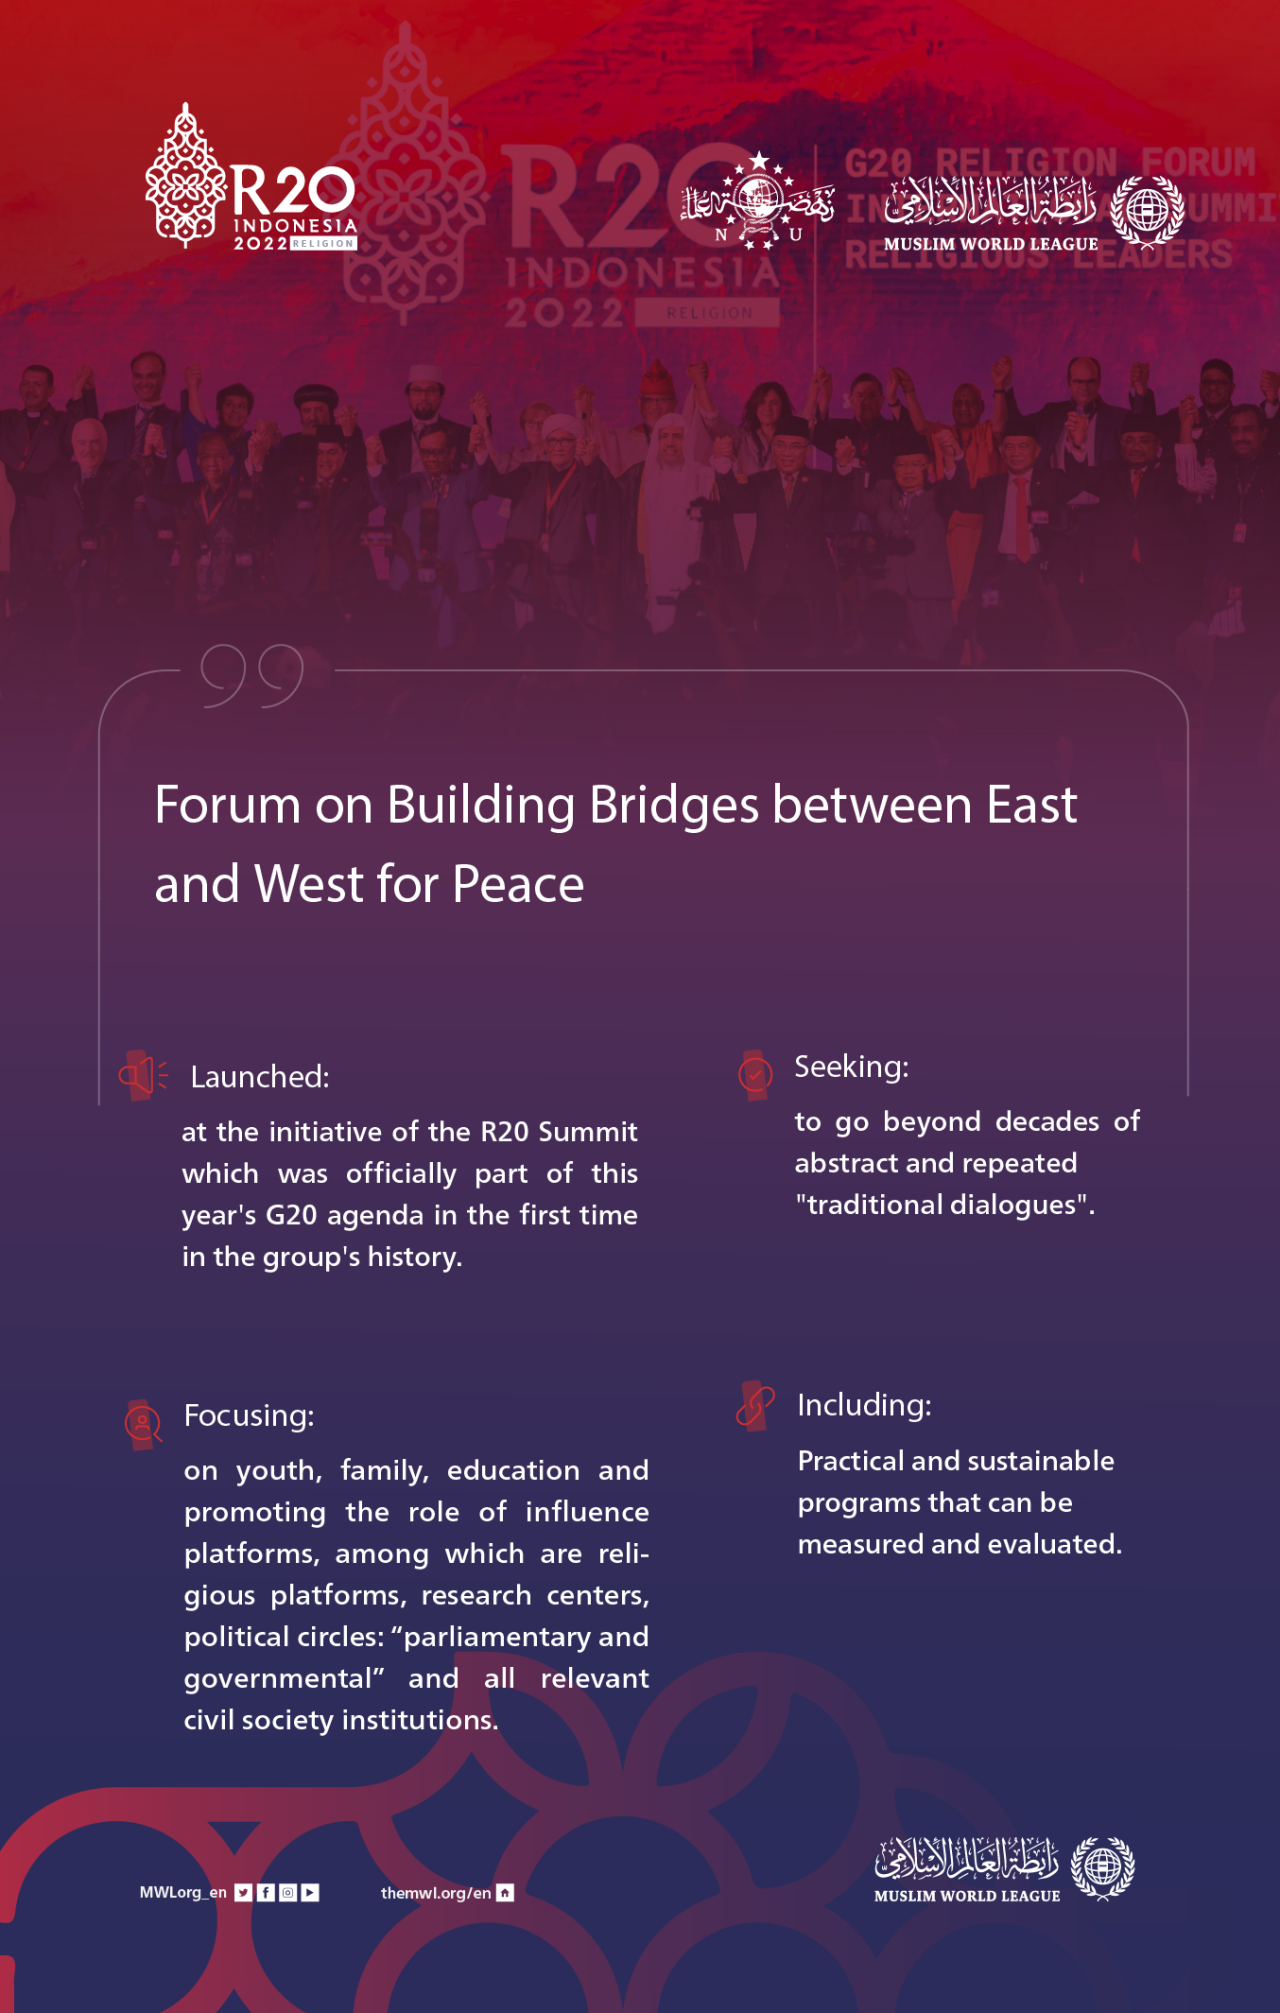 The Muslim World League Launches The Forum on Building Bridges Between East & West